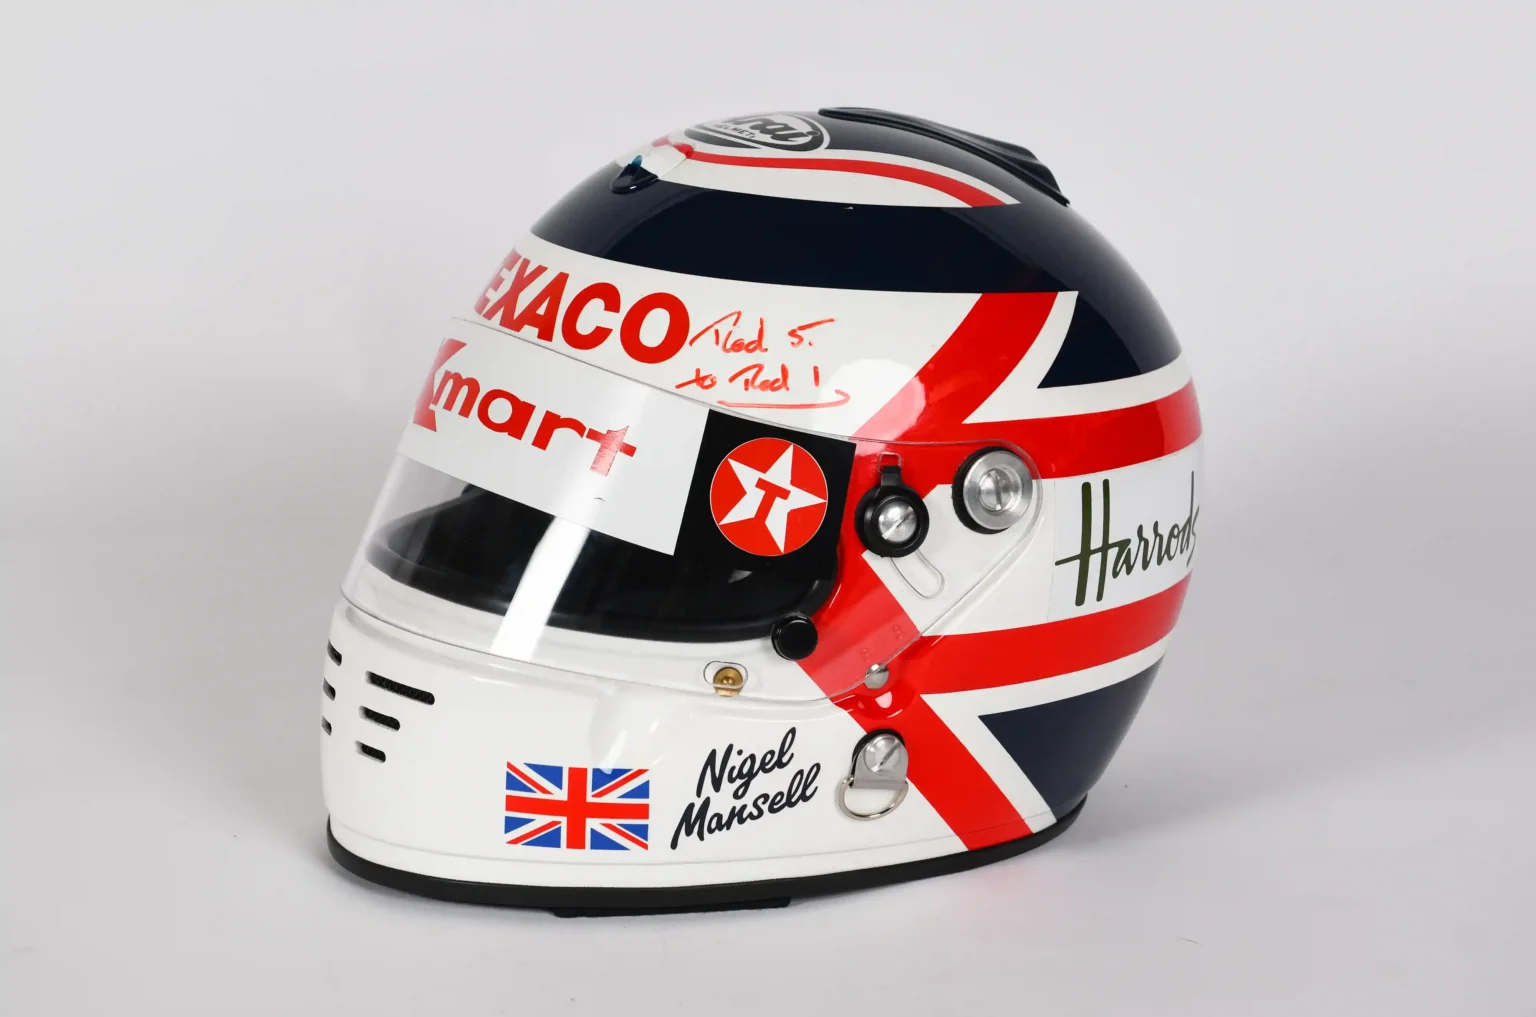 Nigel Mansell's F1 memorabilia auction fetched £55,000, far less than the expected £117,000. Highlights included a signed helmet and a rare photo of four F1 champions.